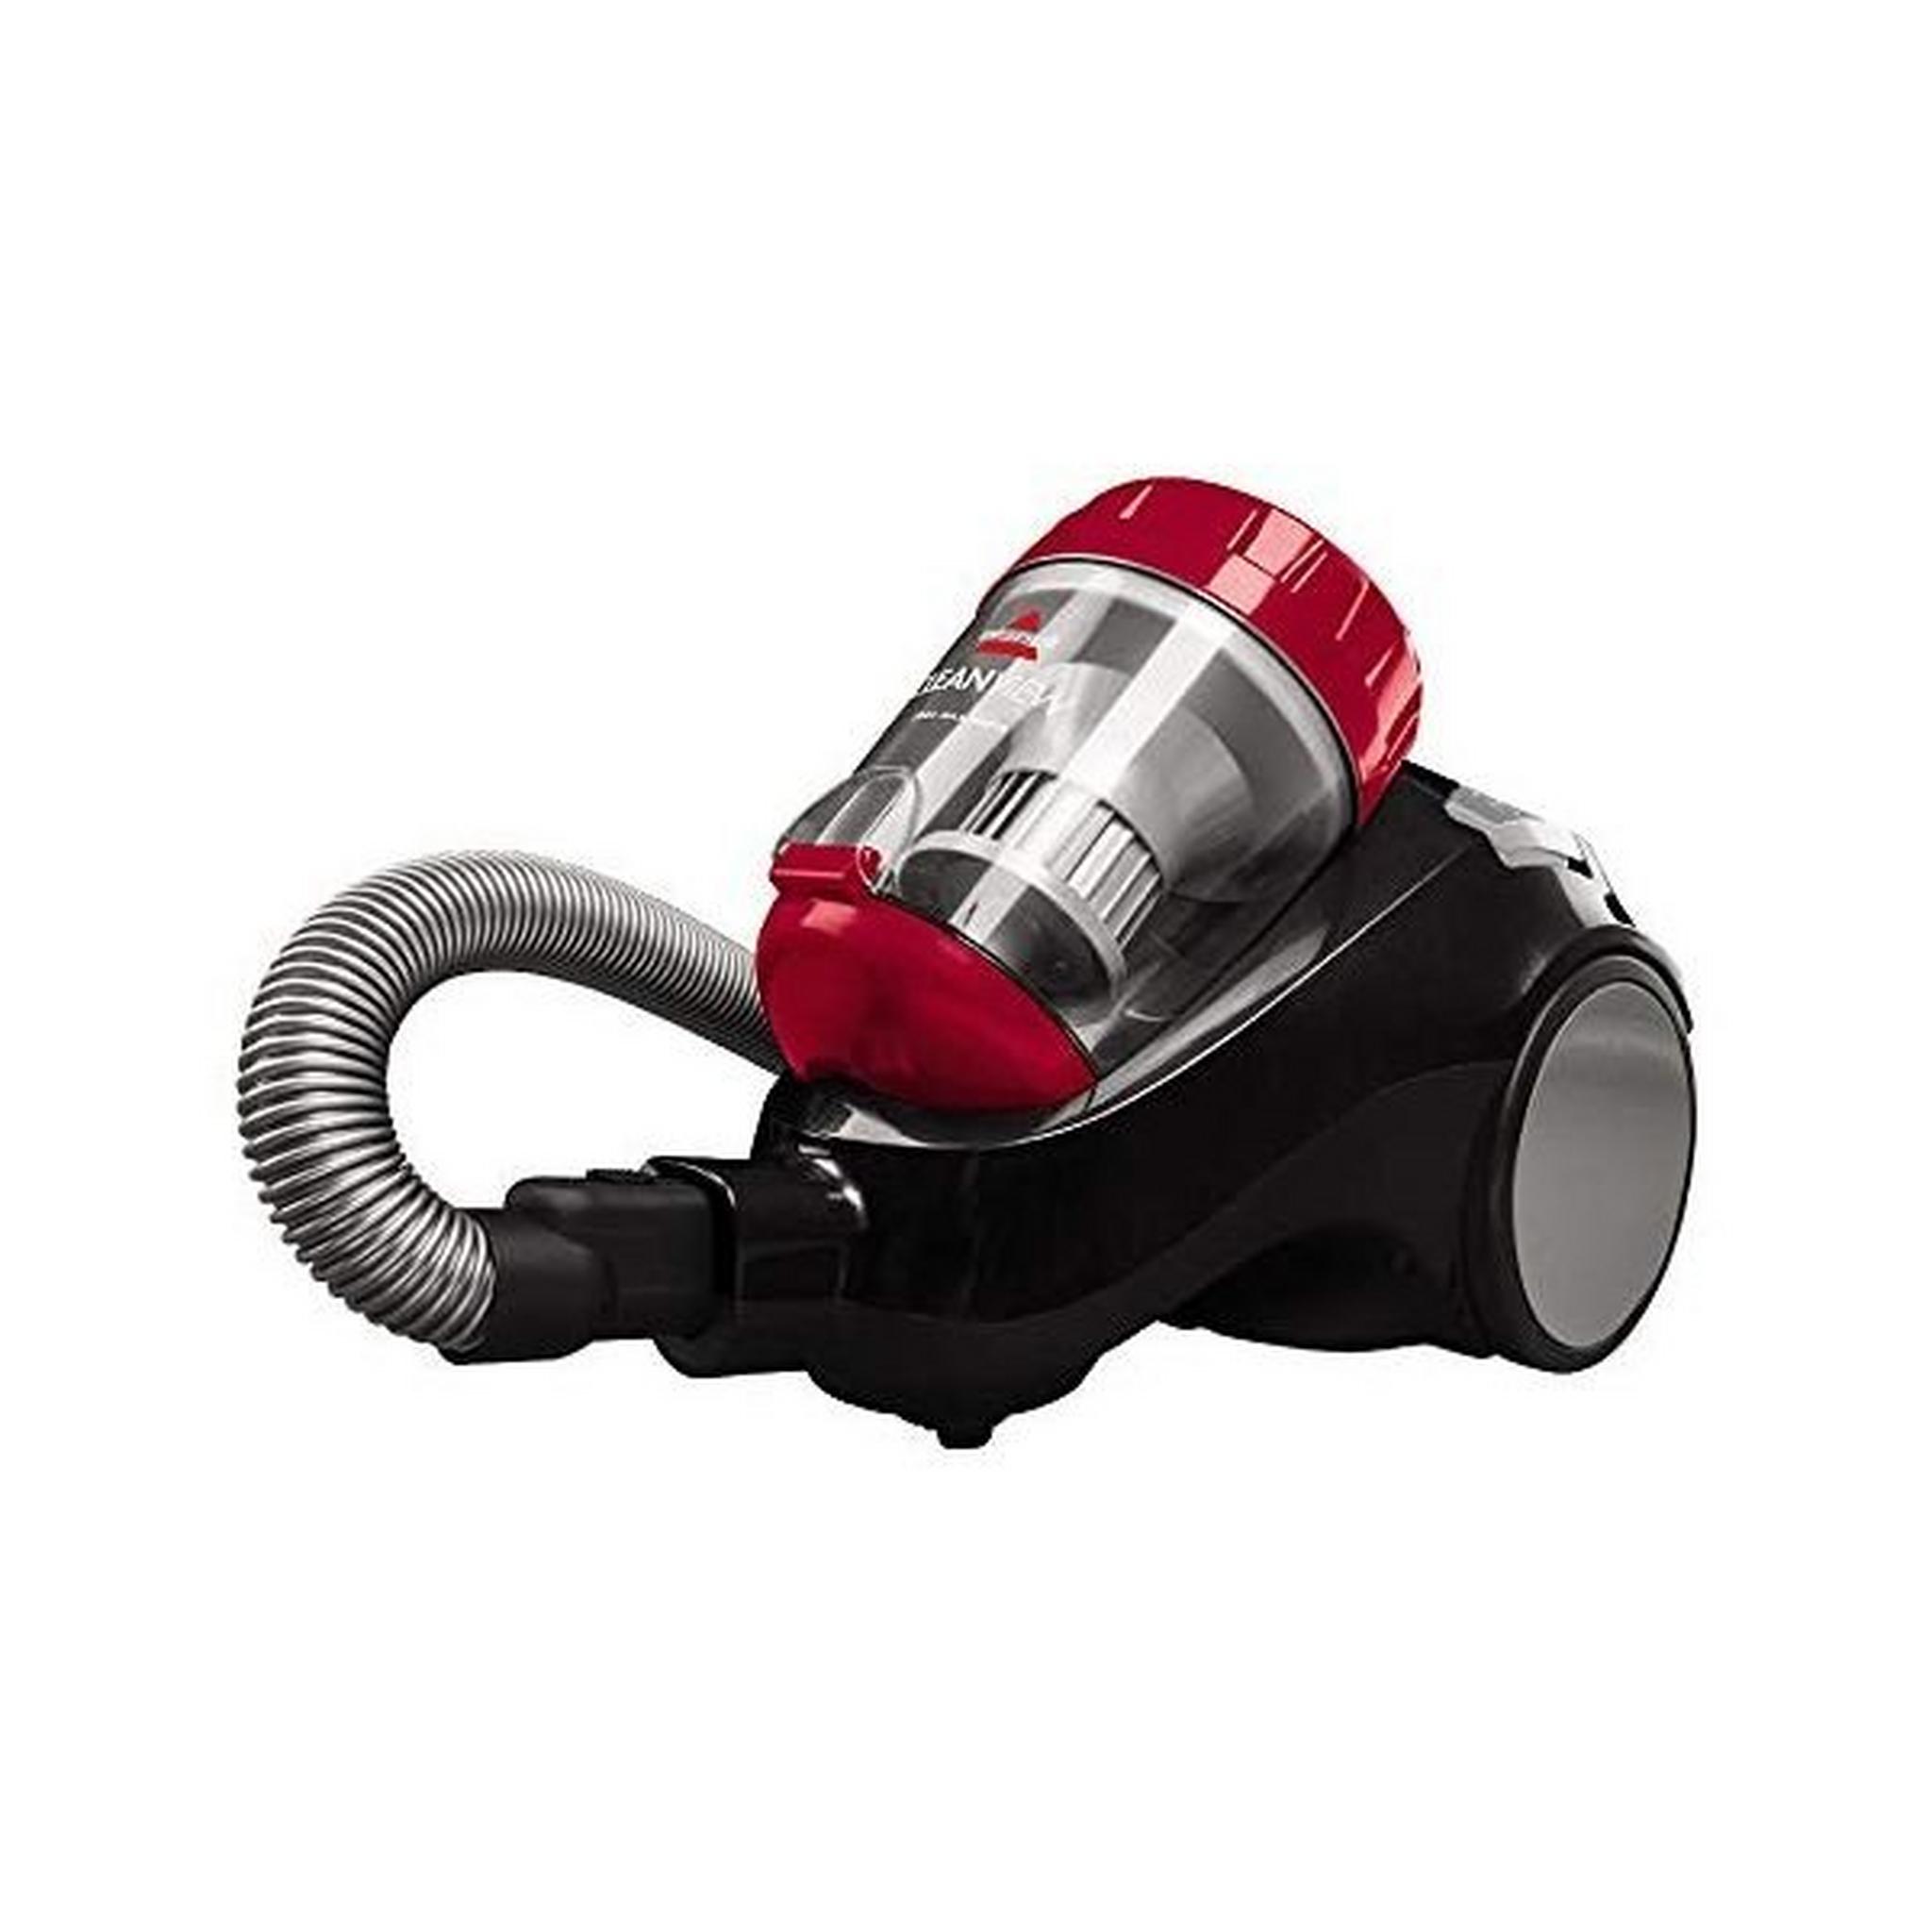 Bissell Bagless Canister Vacuum Cleaner 2000 Watts